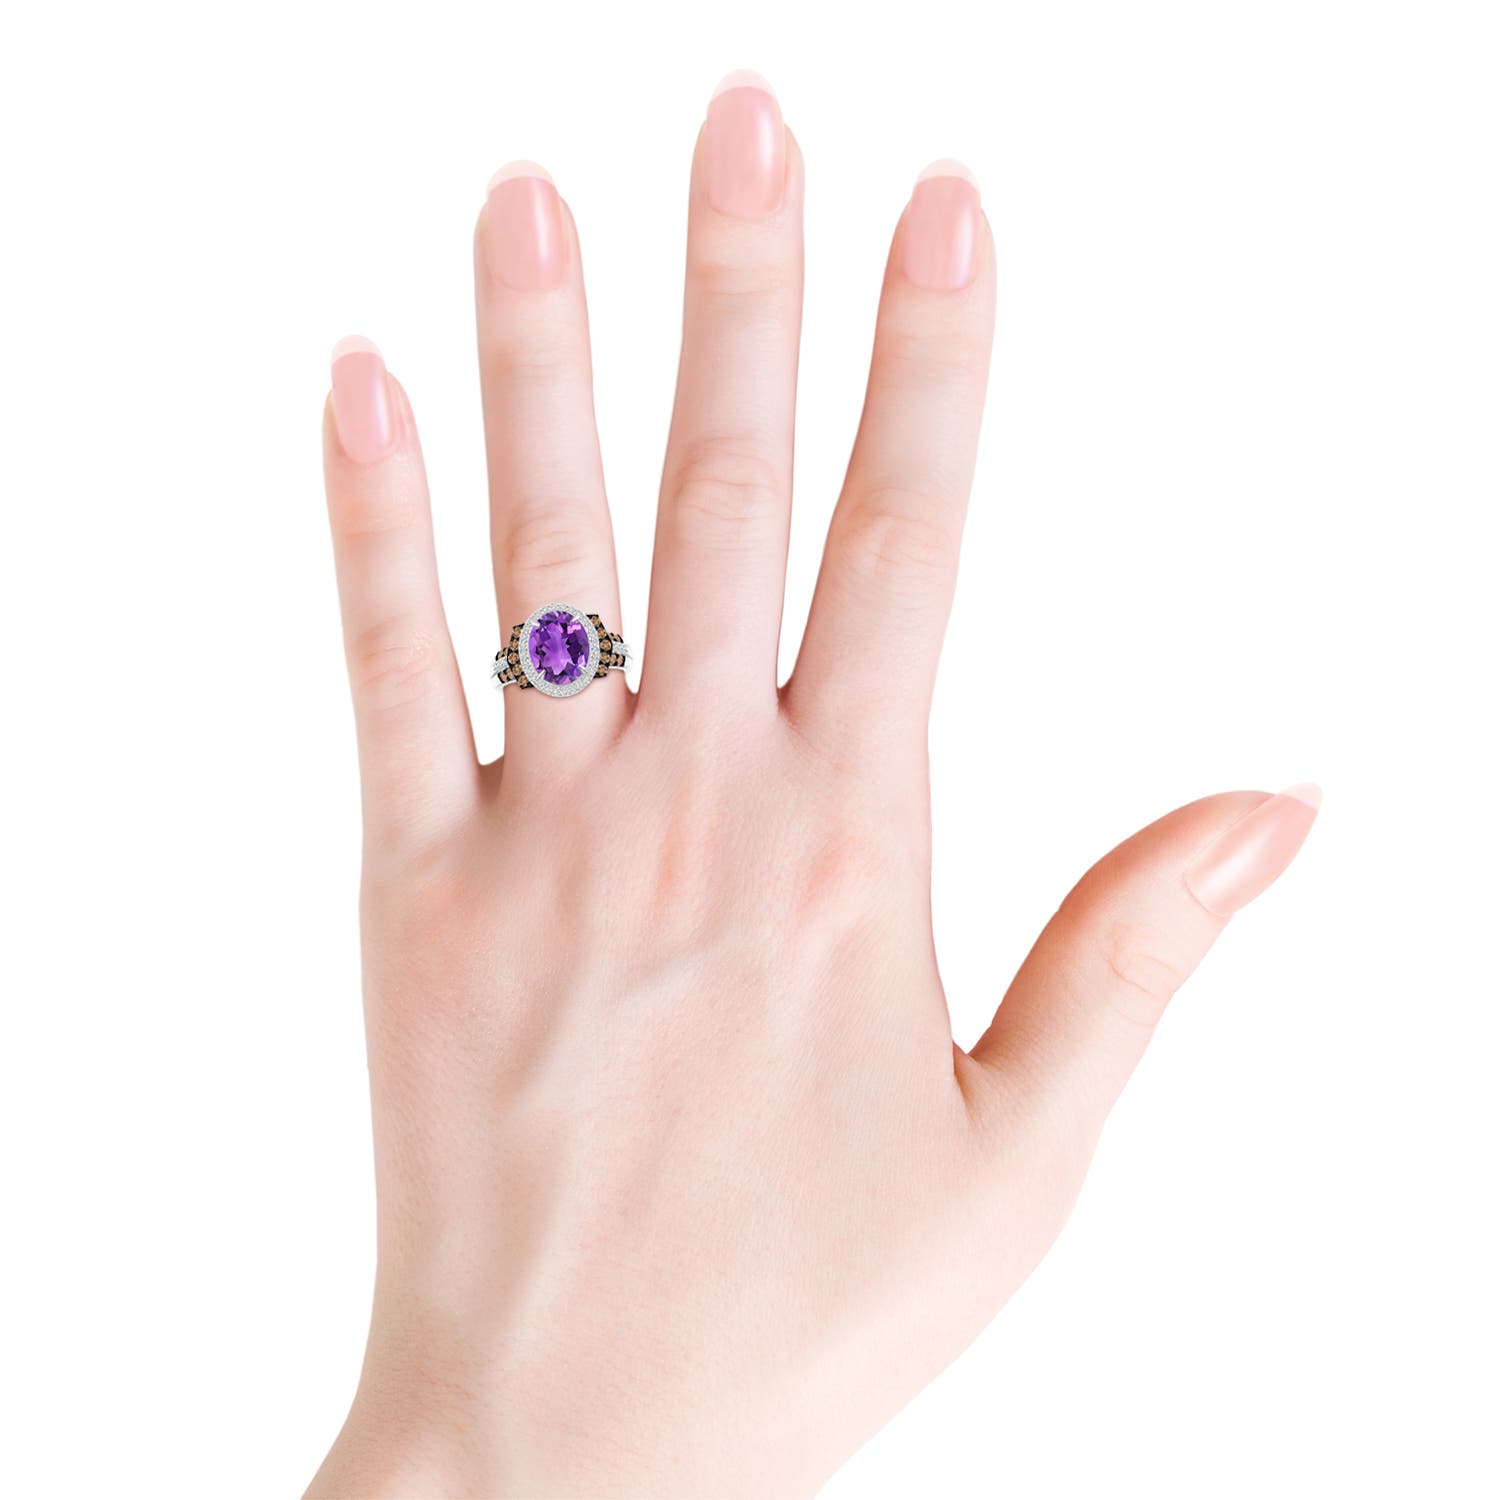 AAA - Amethyst / 2.81 CT / 14 KT White Gold